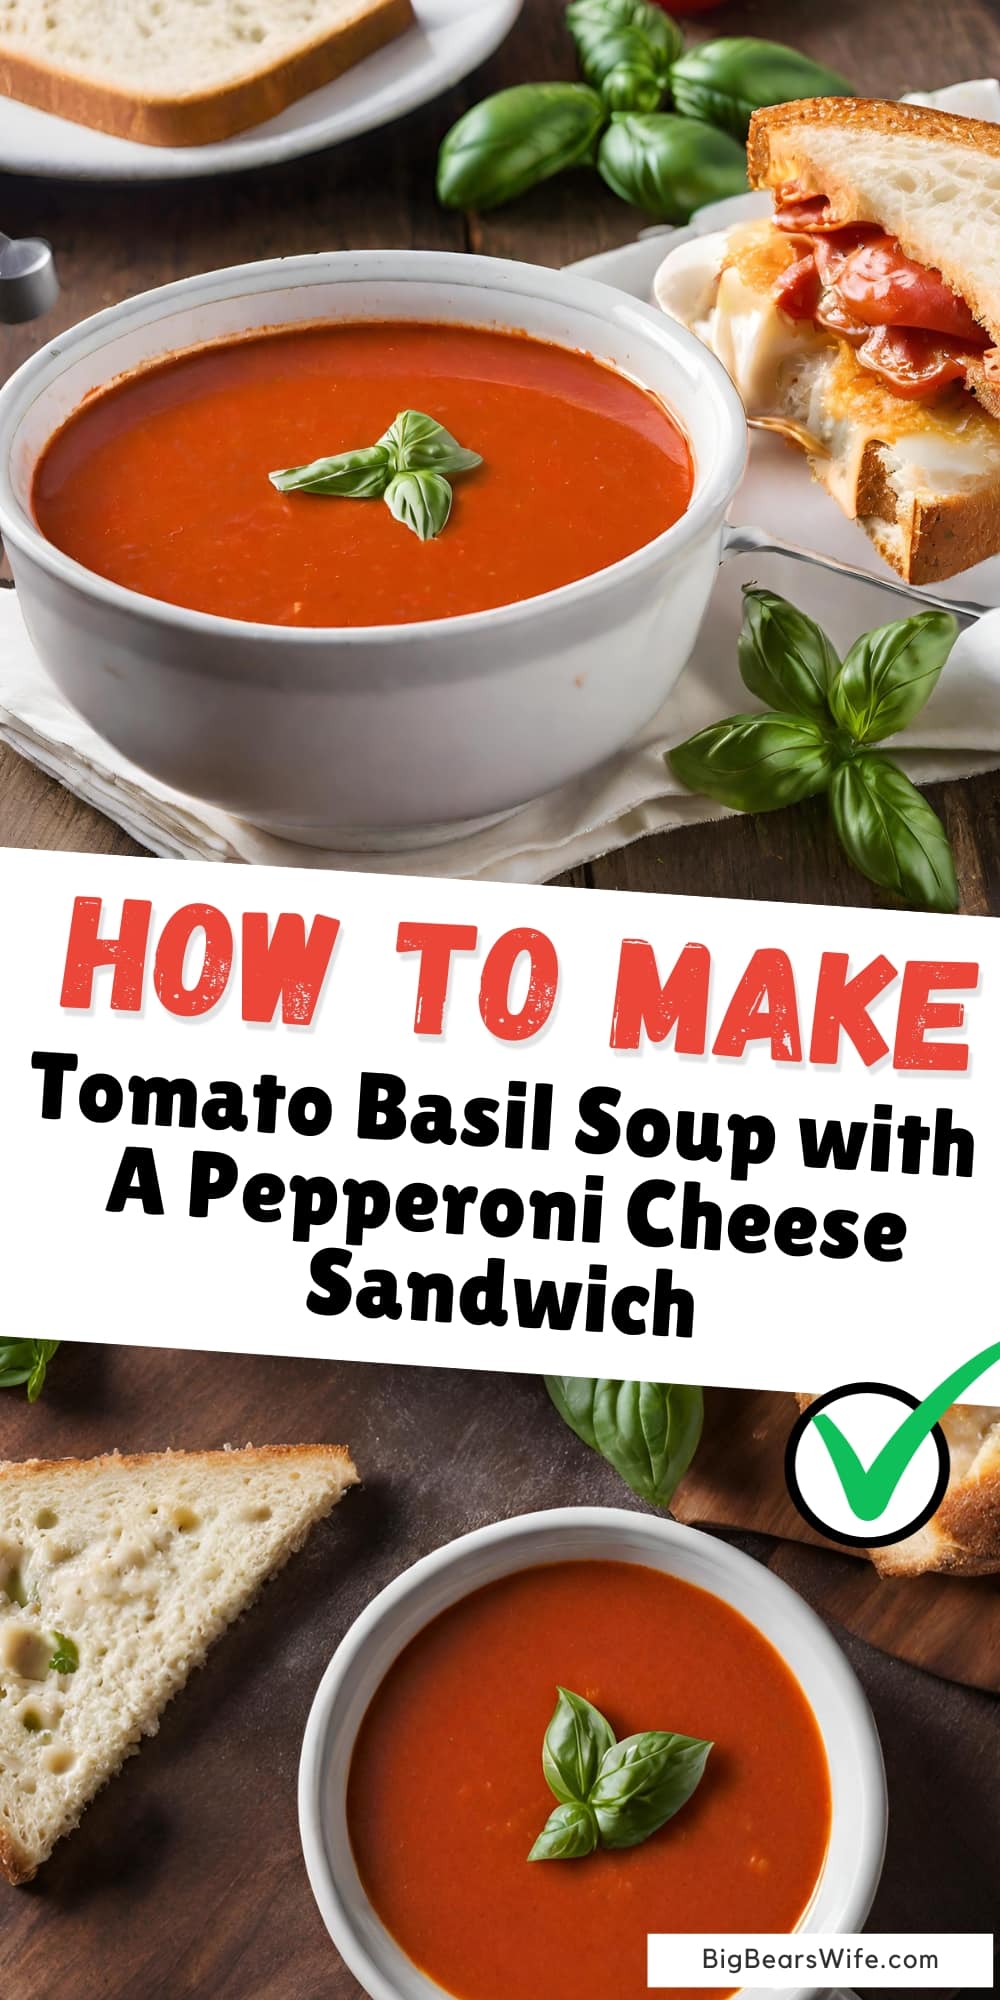 Discover the perfect pairing of tomato basil soup and a mouthwatering pepperoni cheese sandwich. Whether you're a fan of savory soups or delicious sandwiches, this dynamic duo will satisfy your cravings and leave you wanting more. via @bigbearswife